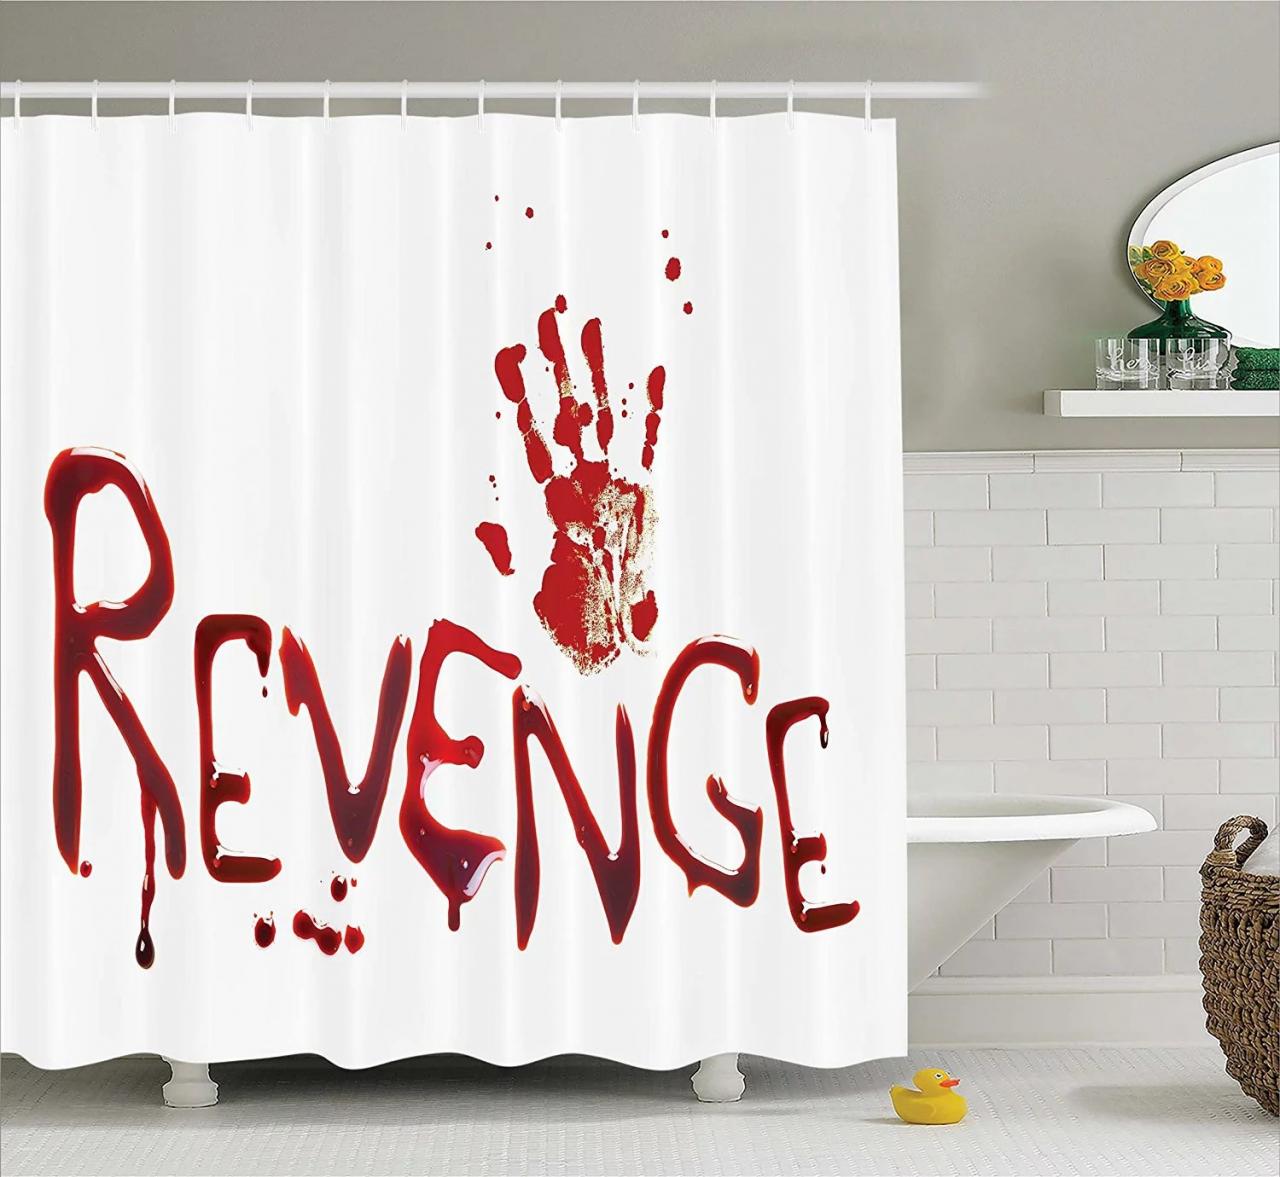 Bloody Shower Curtain Set by , Handprint and Revenge with Splashed